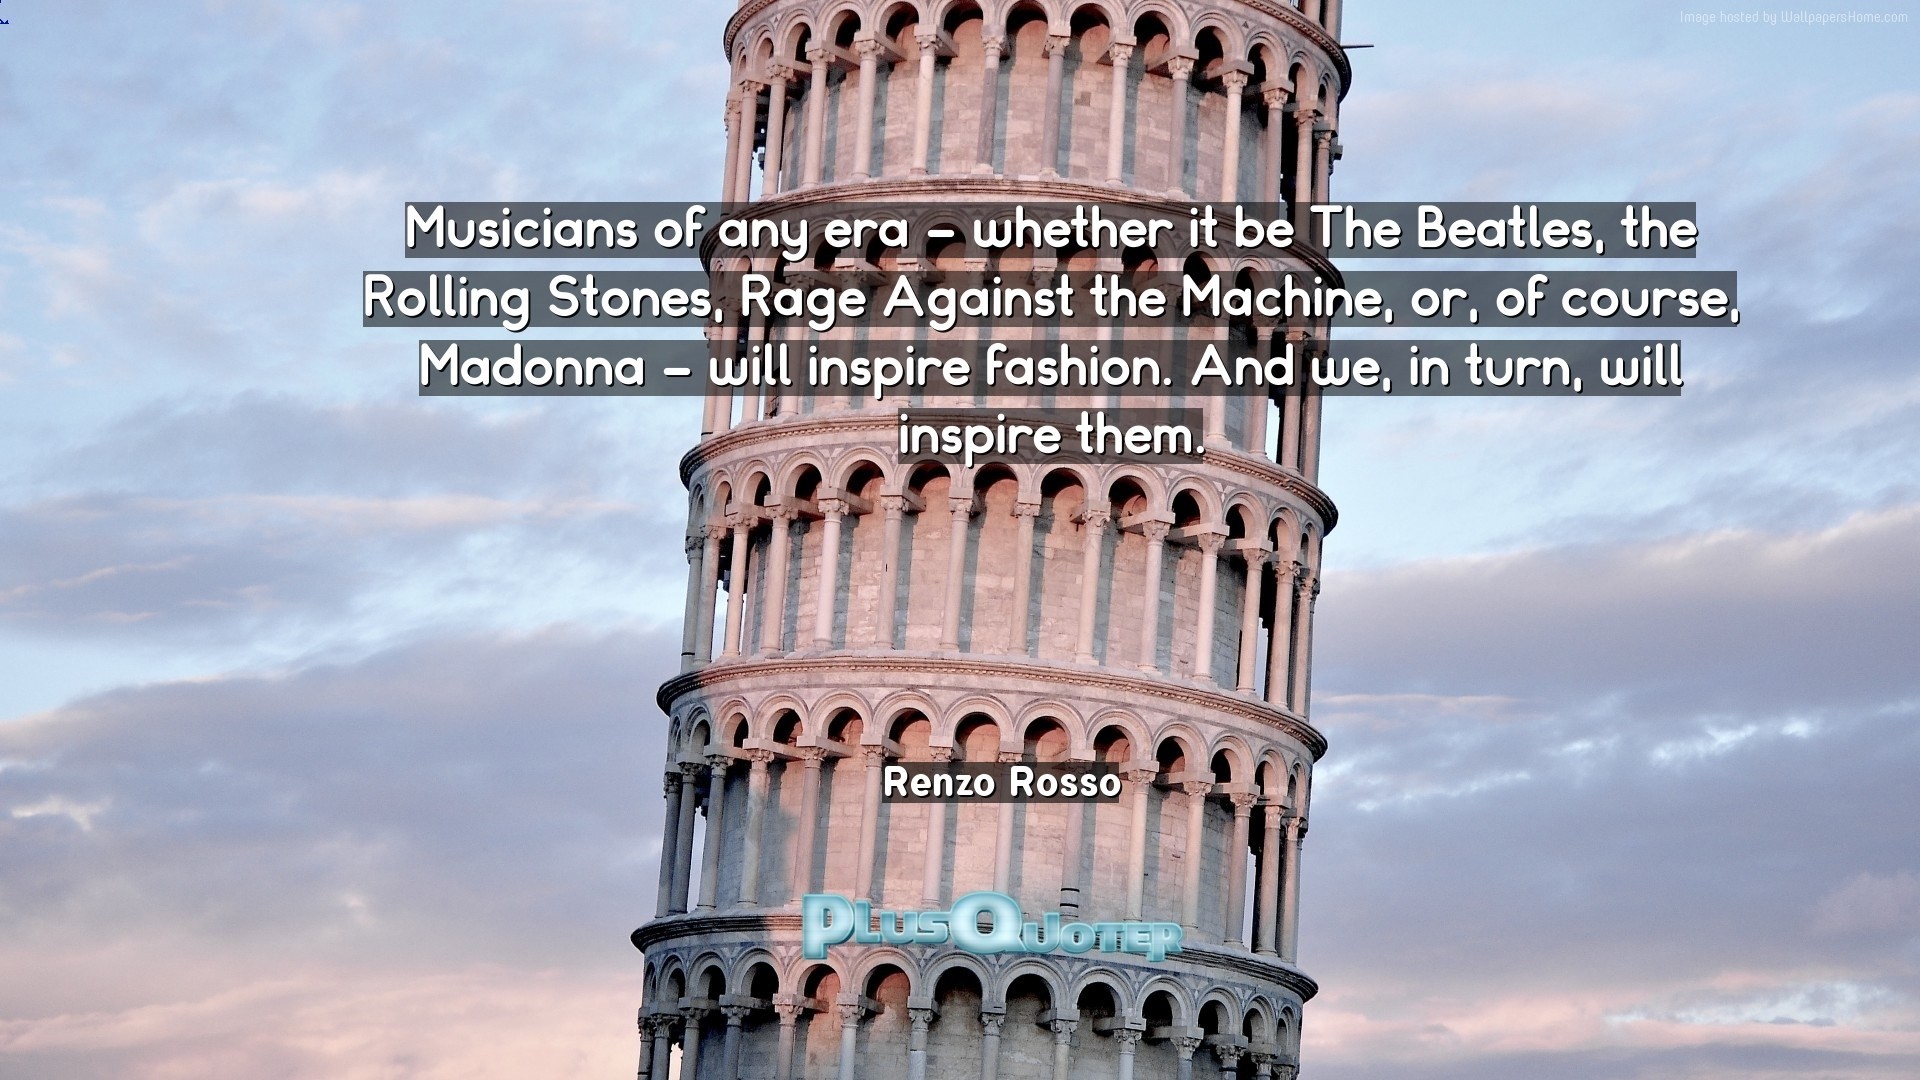 1920x1080 Download Wallpaper with inspirational Quotes- "Musicians of any era -  whether it be The